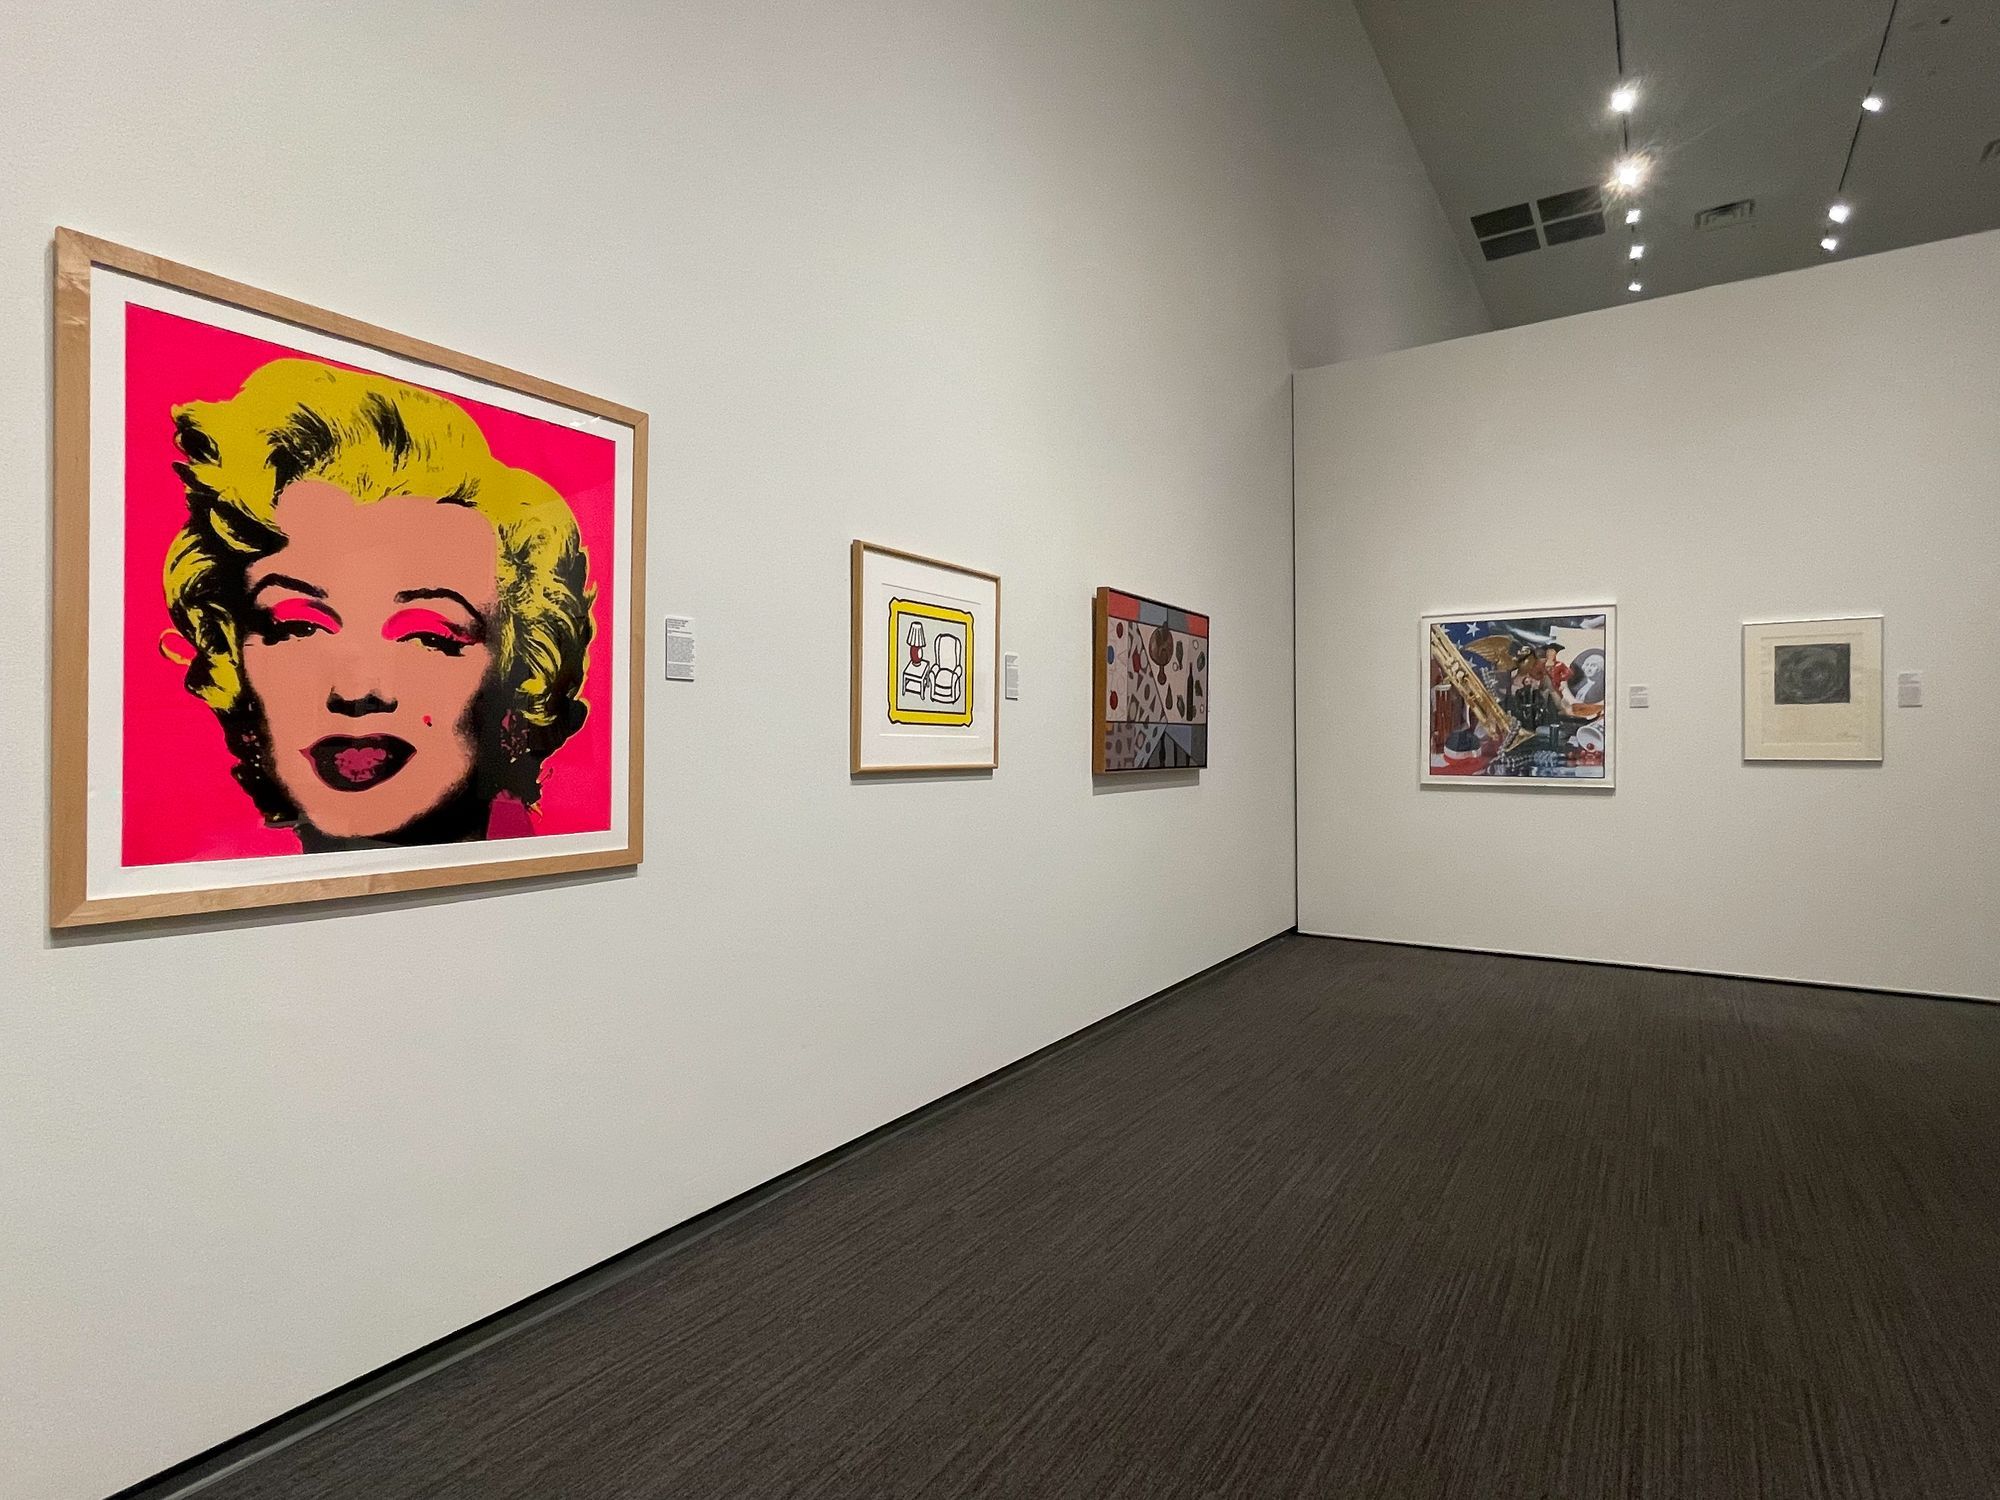 How to see original works from Warhol, Pollock and more in Sioux Falls